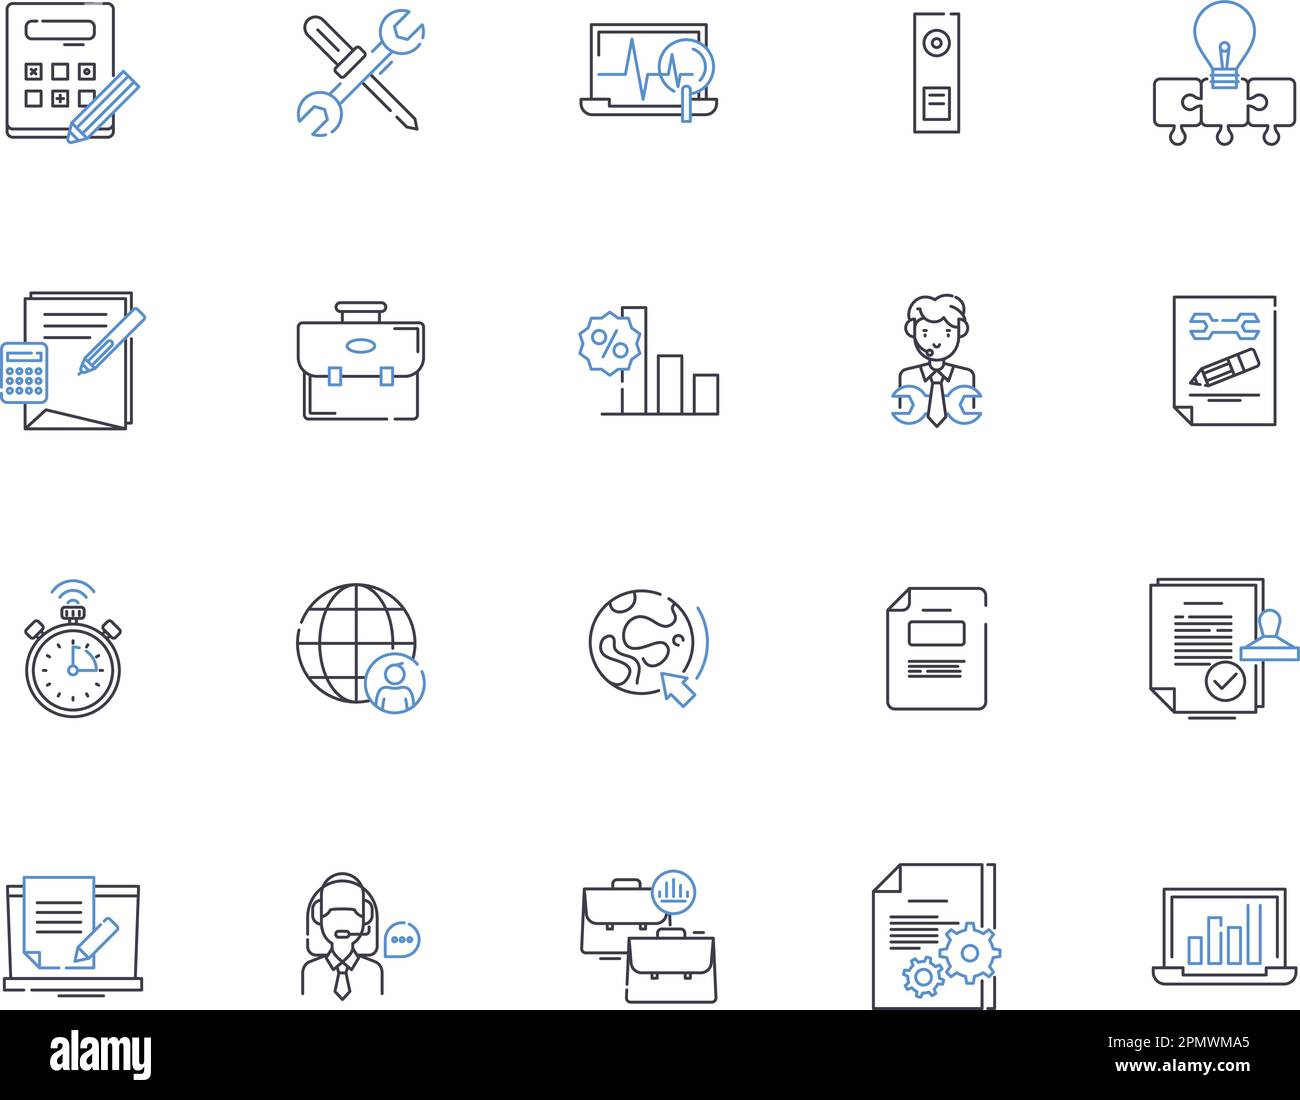 Analytics outline icons collection. Analysis, Trends, Data, Insights, Metrics, Surveys, KPIs vector and illustration concept set. Forecasts, Modeling Stock Vector